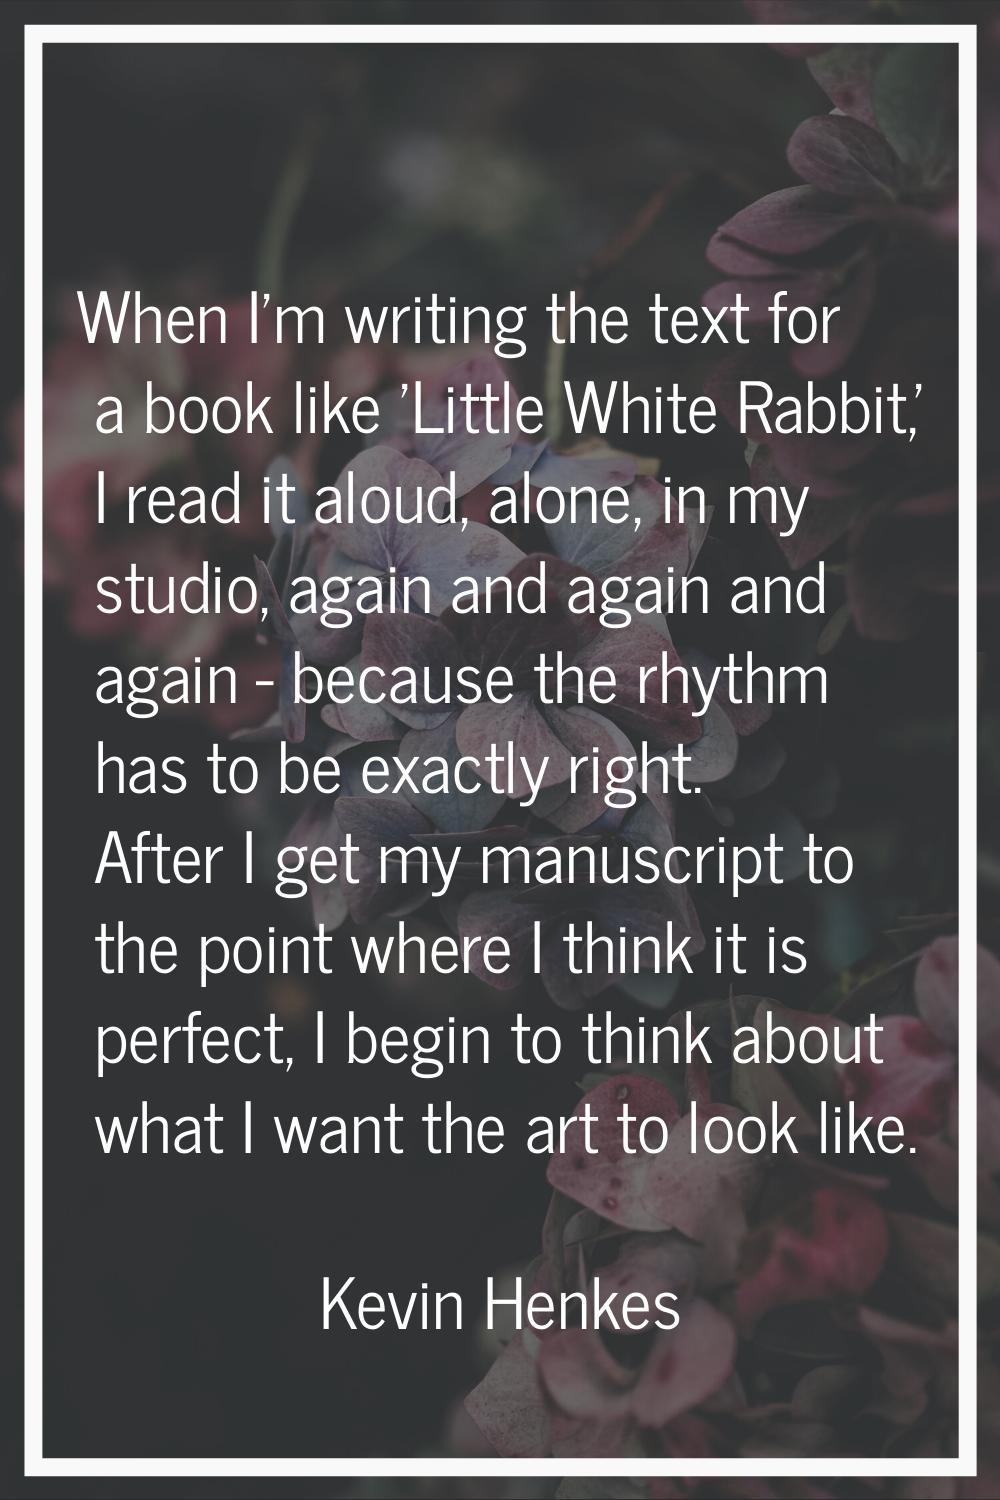 When I'm writing the text for a book like 'Little White Rabbit,' I read it aloud, alone, in my stud